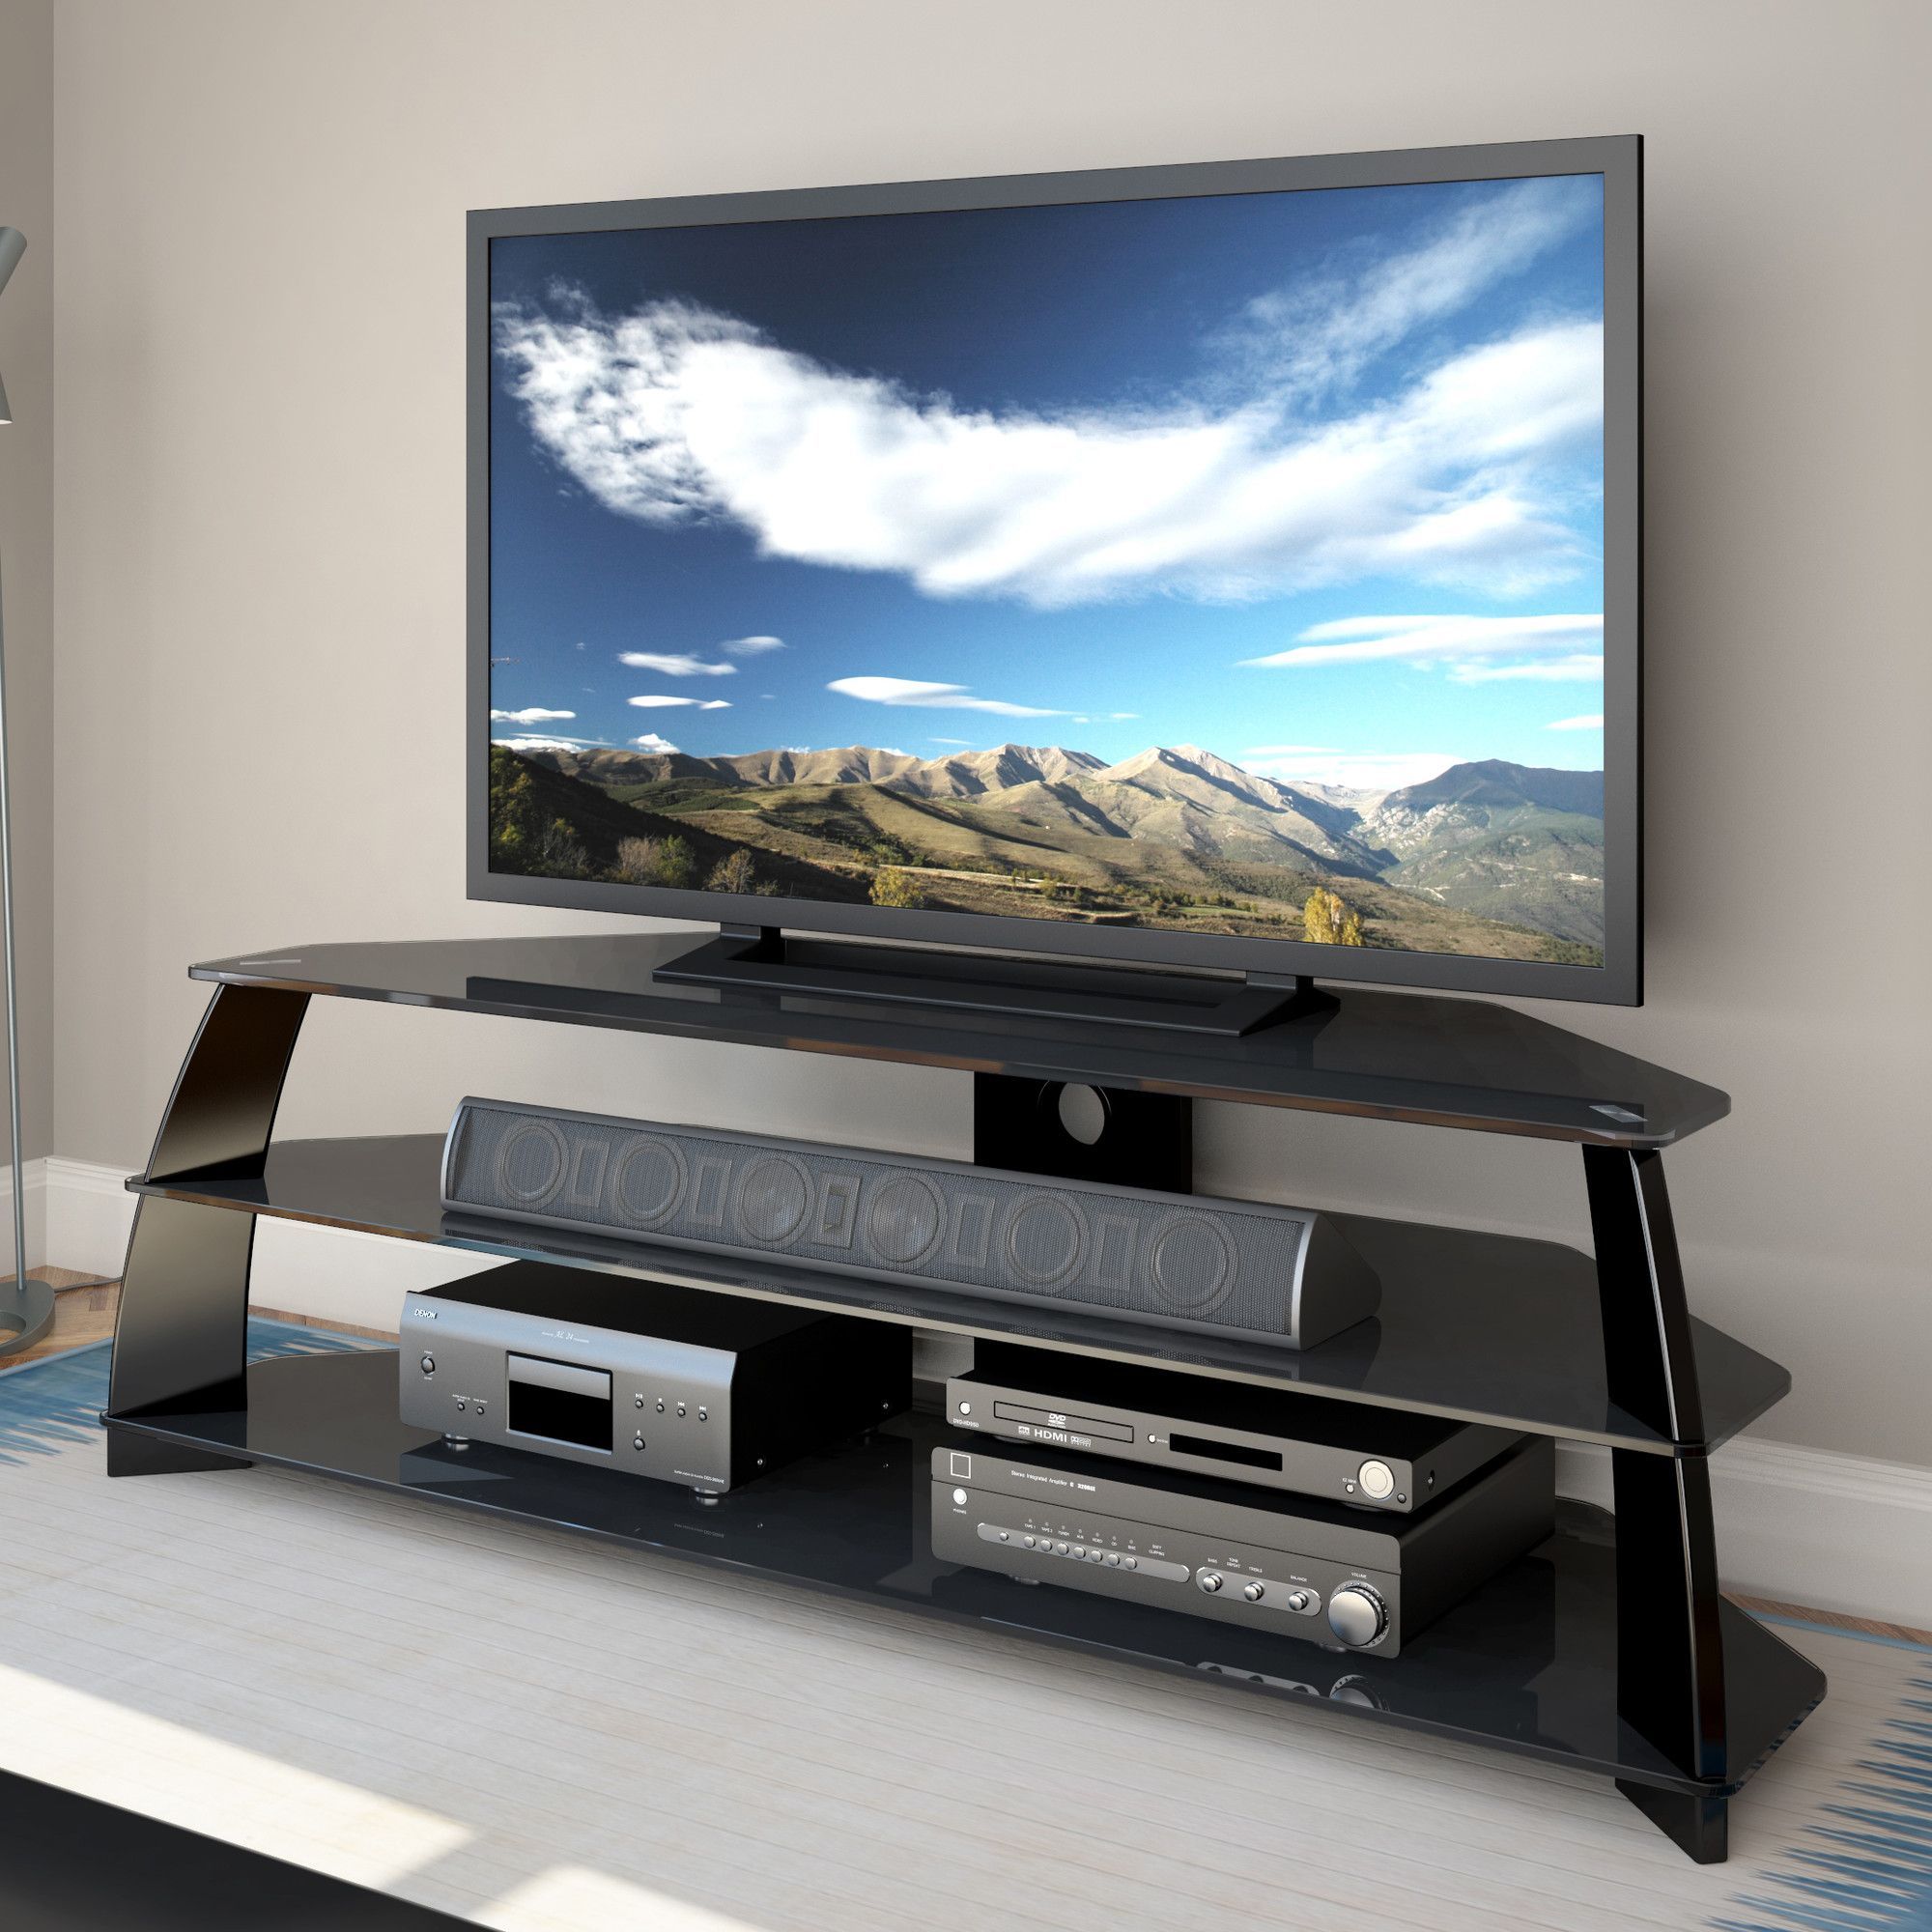 Online Home Store For Furniture, Decor, Outdoors & More With Caleah Tv Stands For Tvs Up To 65" (View 9 of 15)